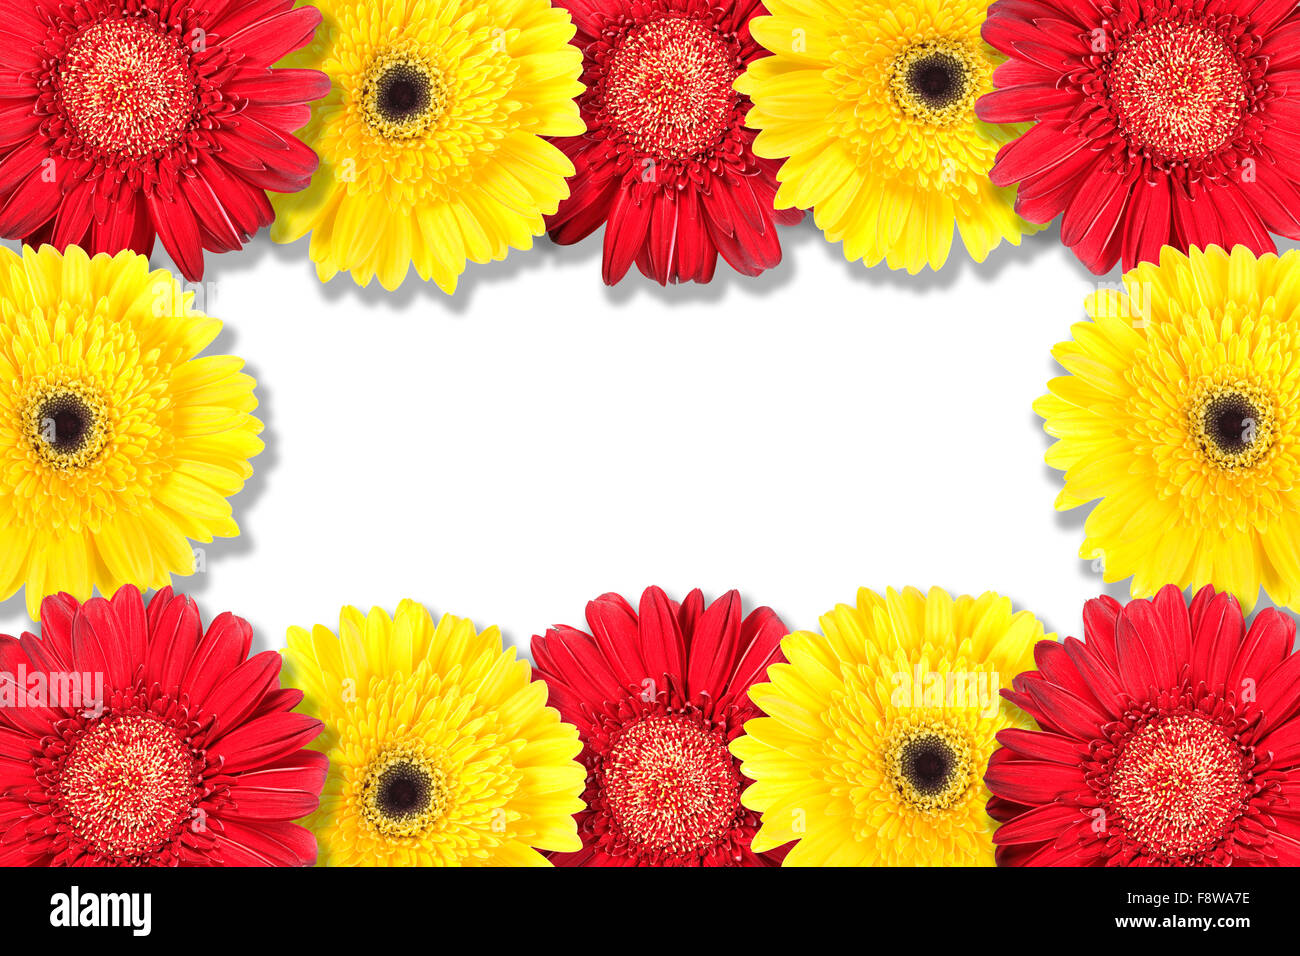 Abstract frame with yellow and red flowers Stock Photo